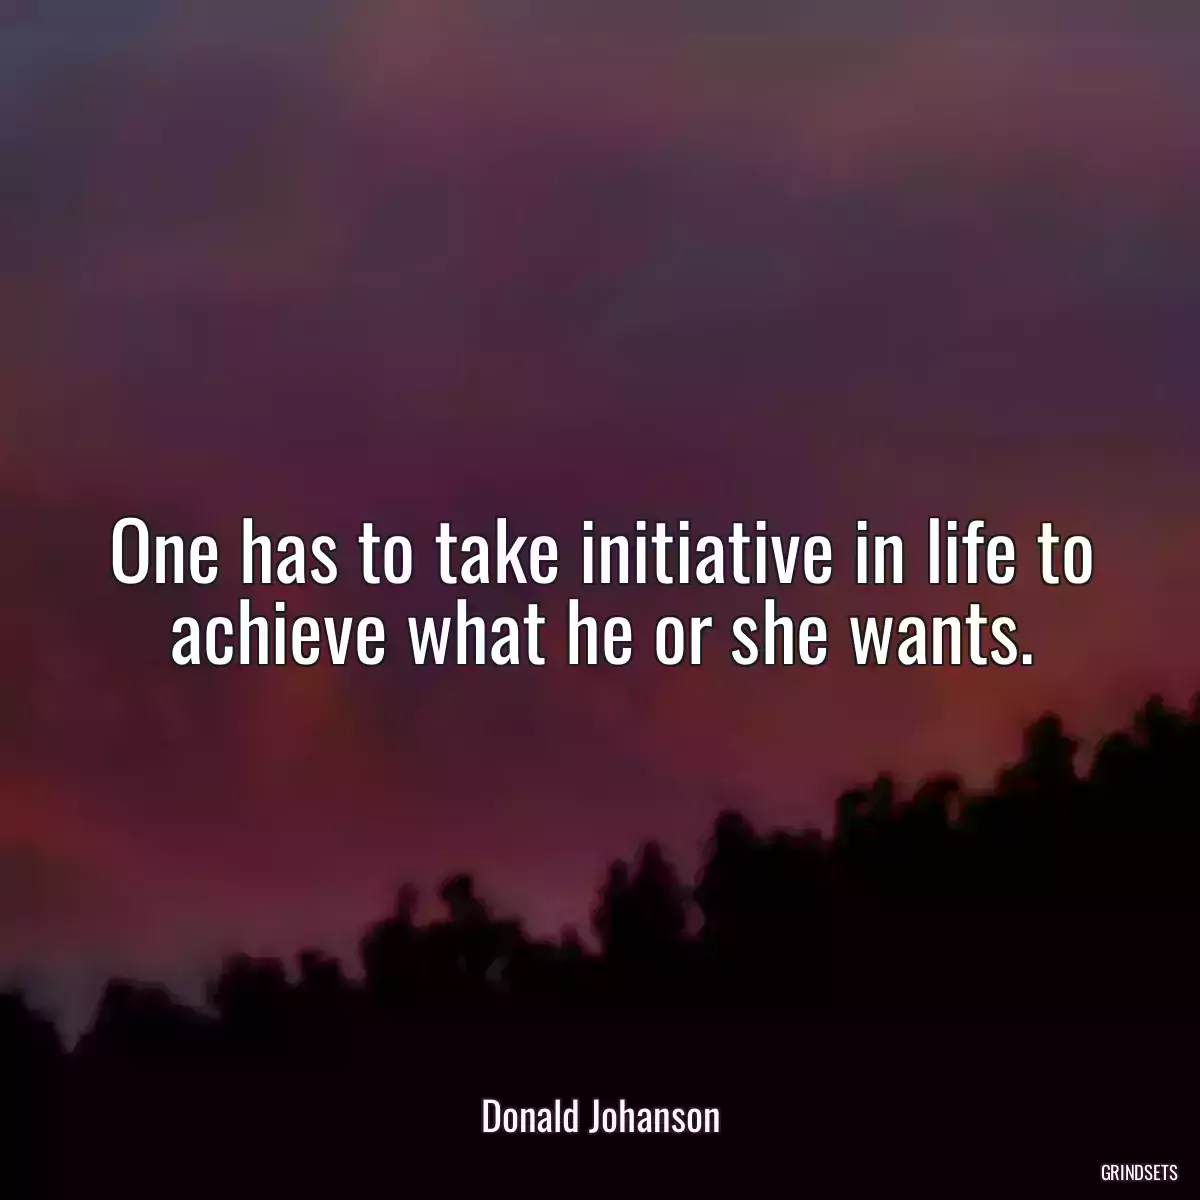 One has to take initiative in life to achieve what he or she wants.